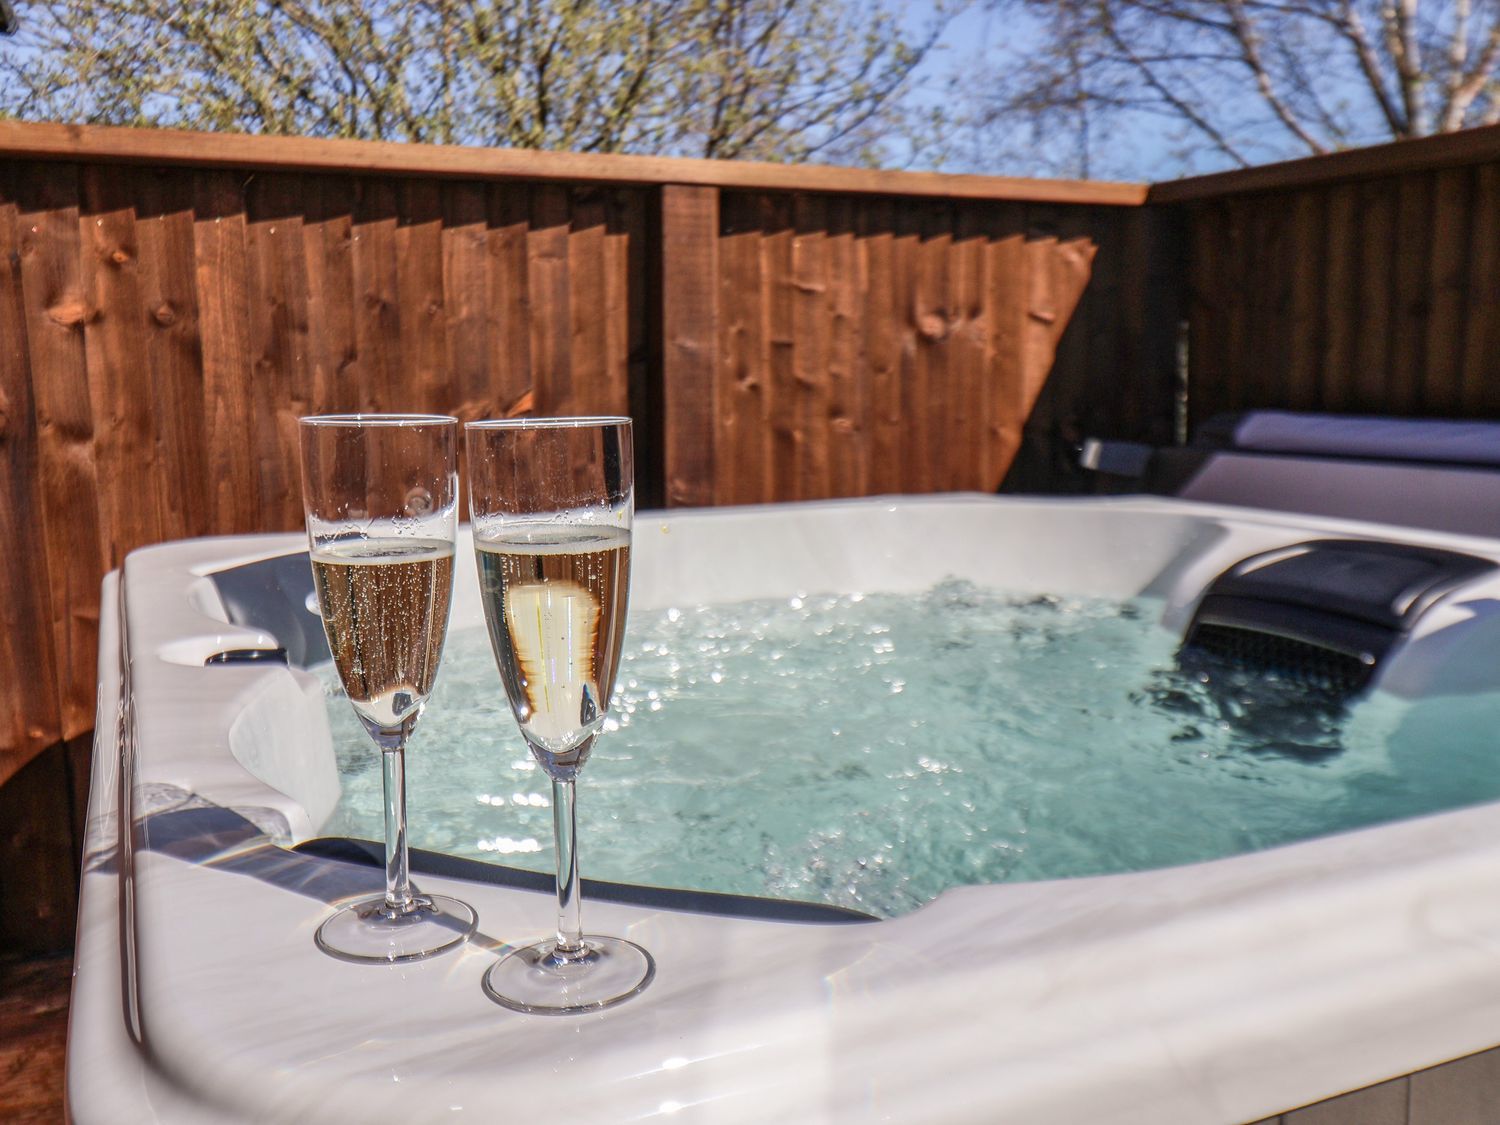 Relax and Unwind: Self-Catering Lodges with Hot Tubs